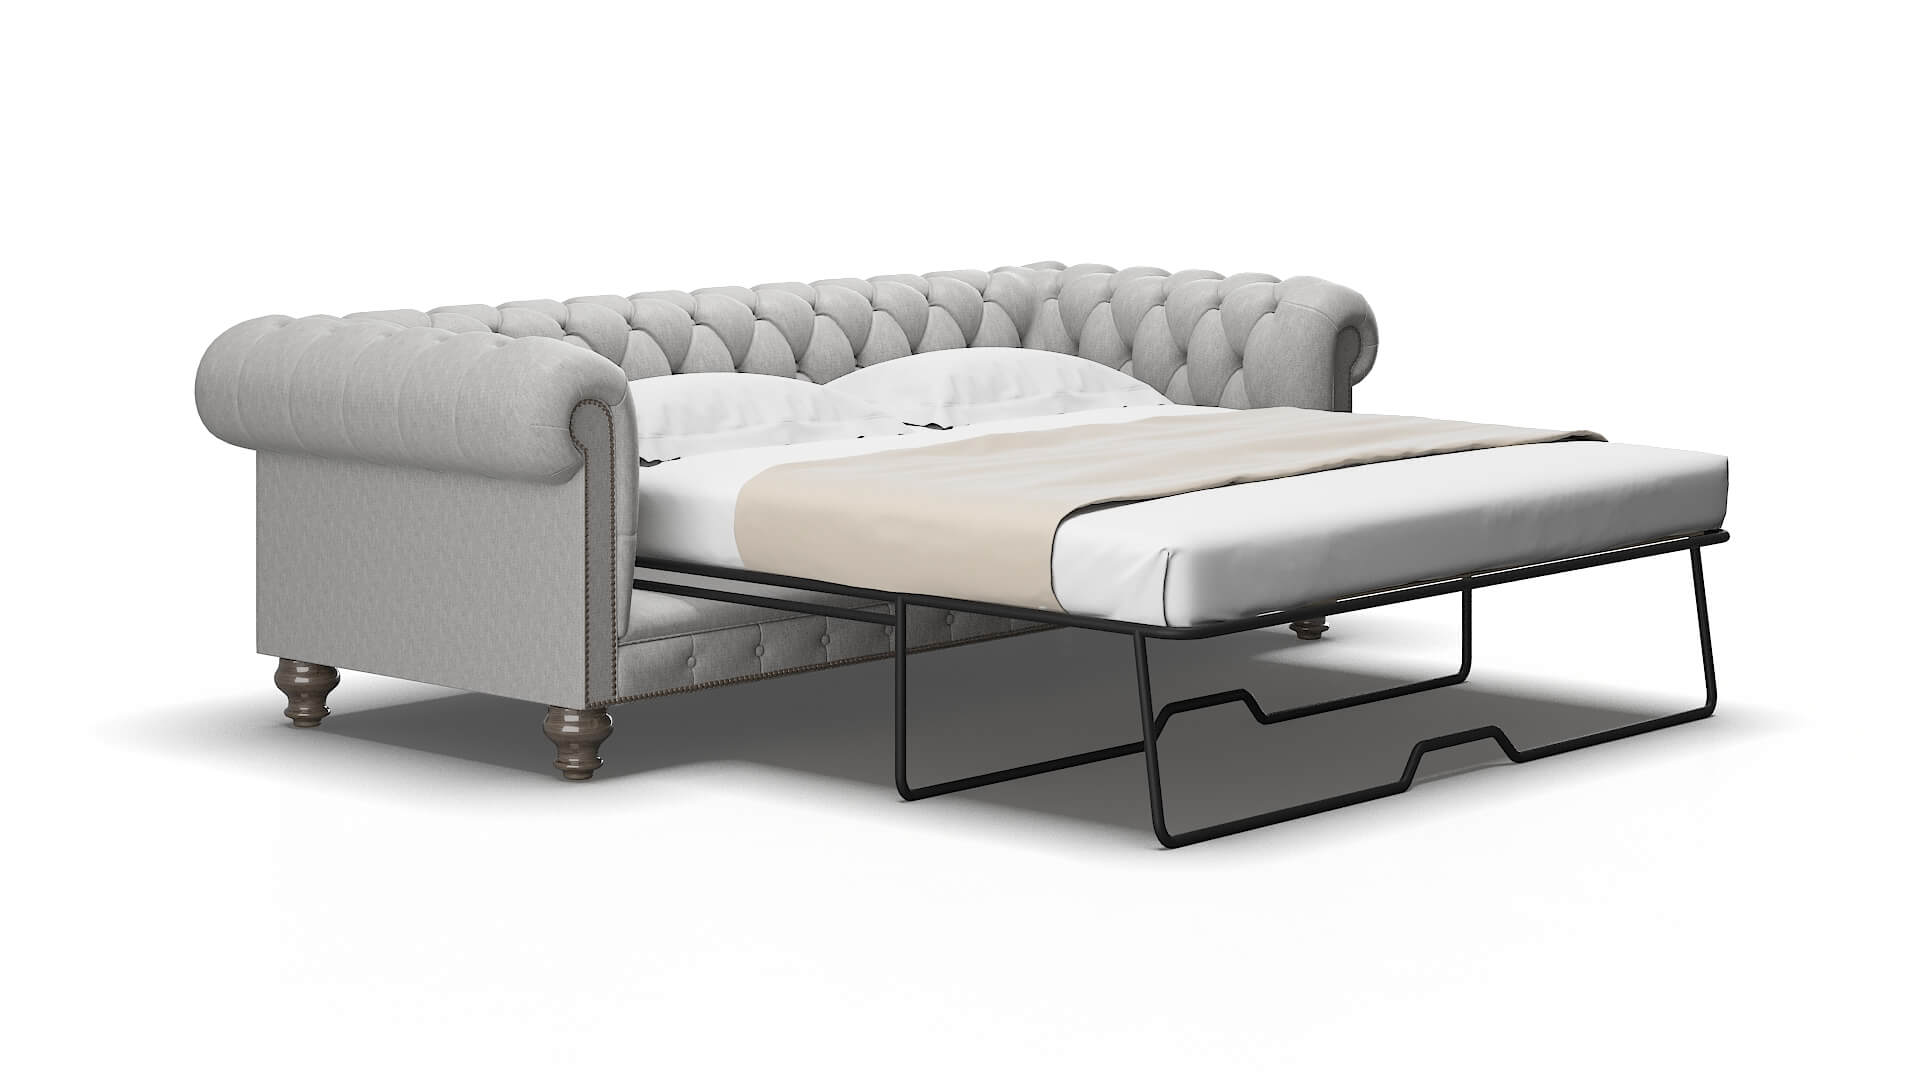 Bordeaux Sectional-Sleeper from DreamSofa